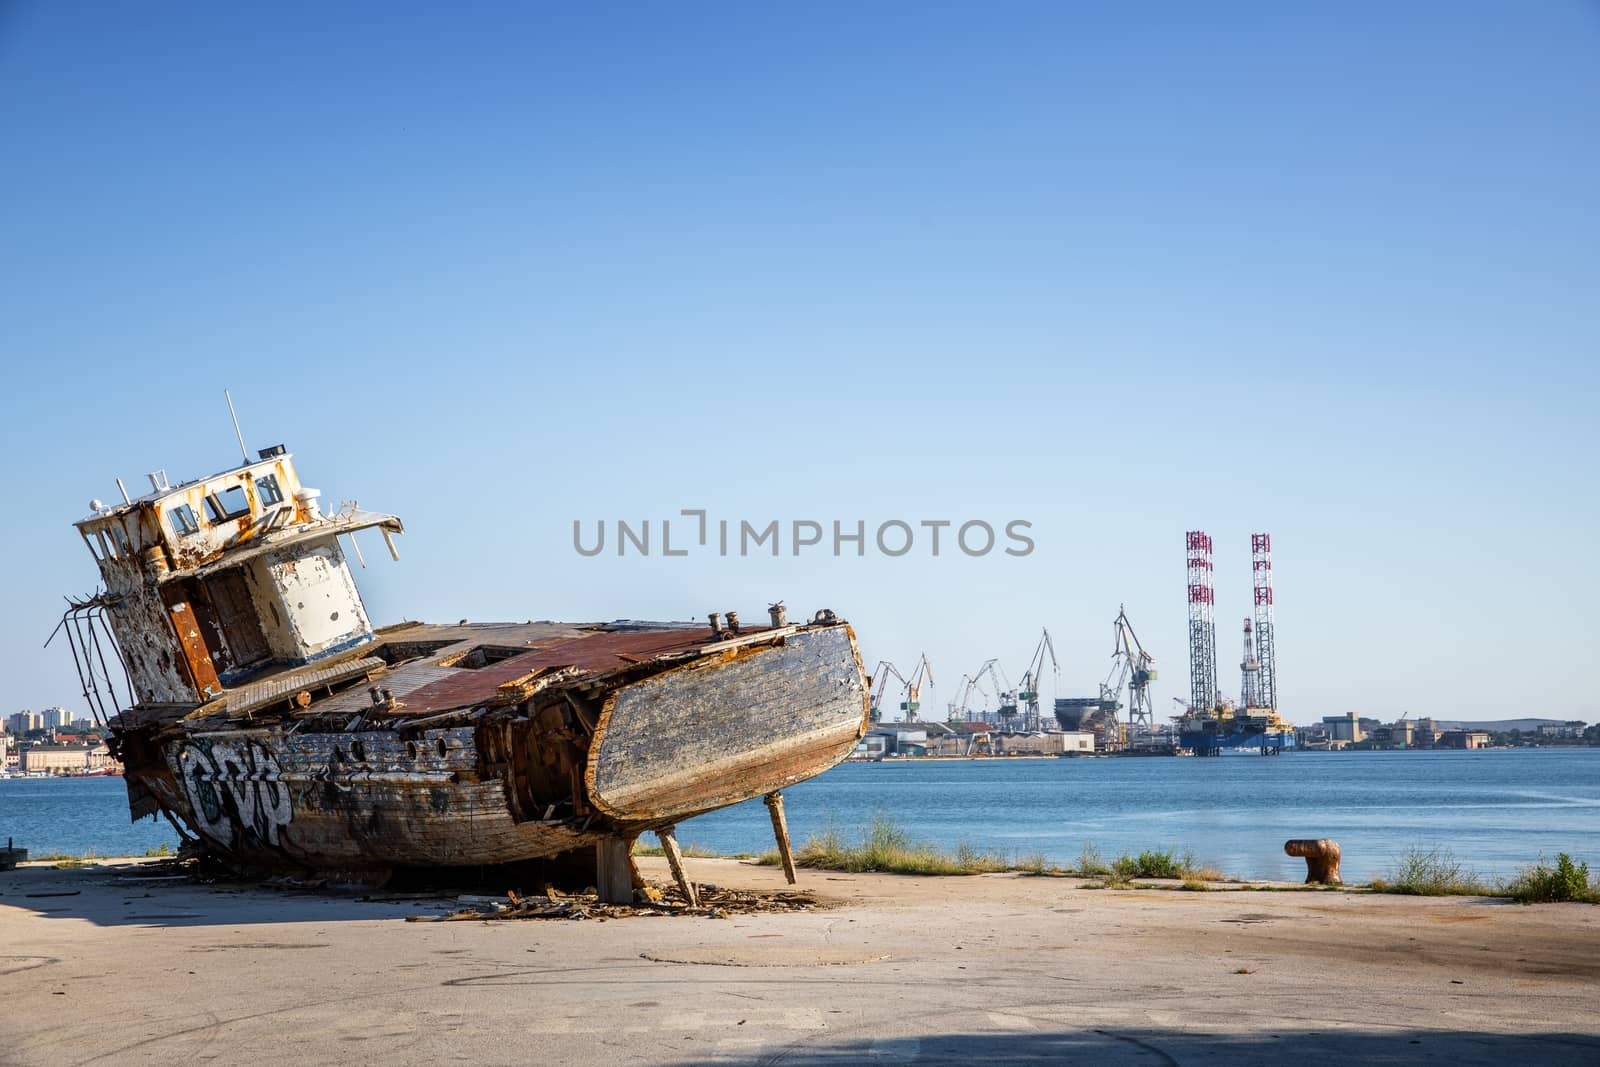 Old shipwreck at the harbor under blue sky